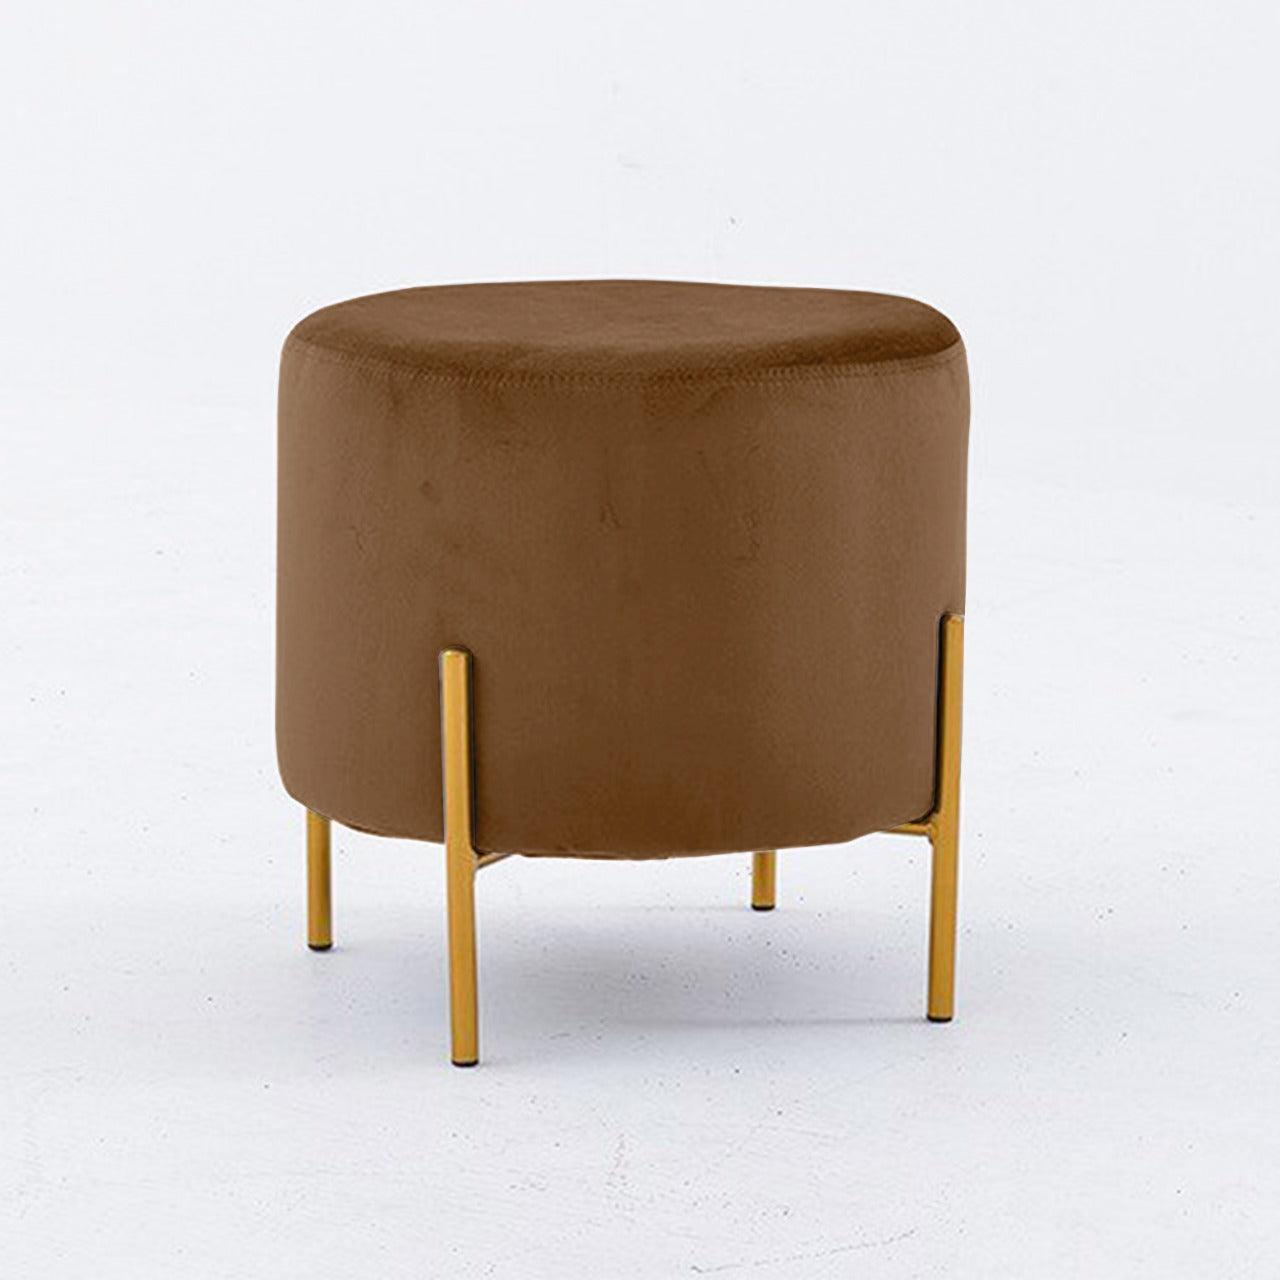 Wooden stool Round shape With Steel Stand - 159 - 92Bedding